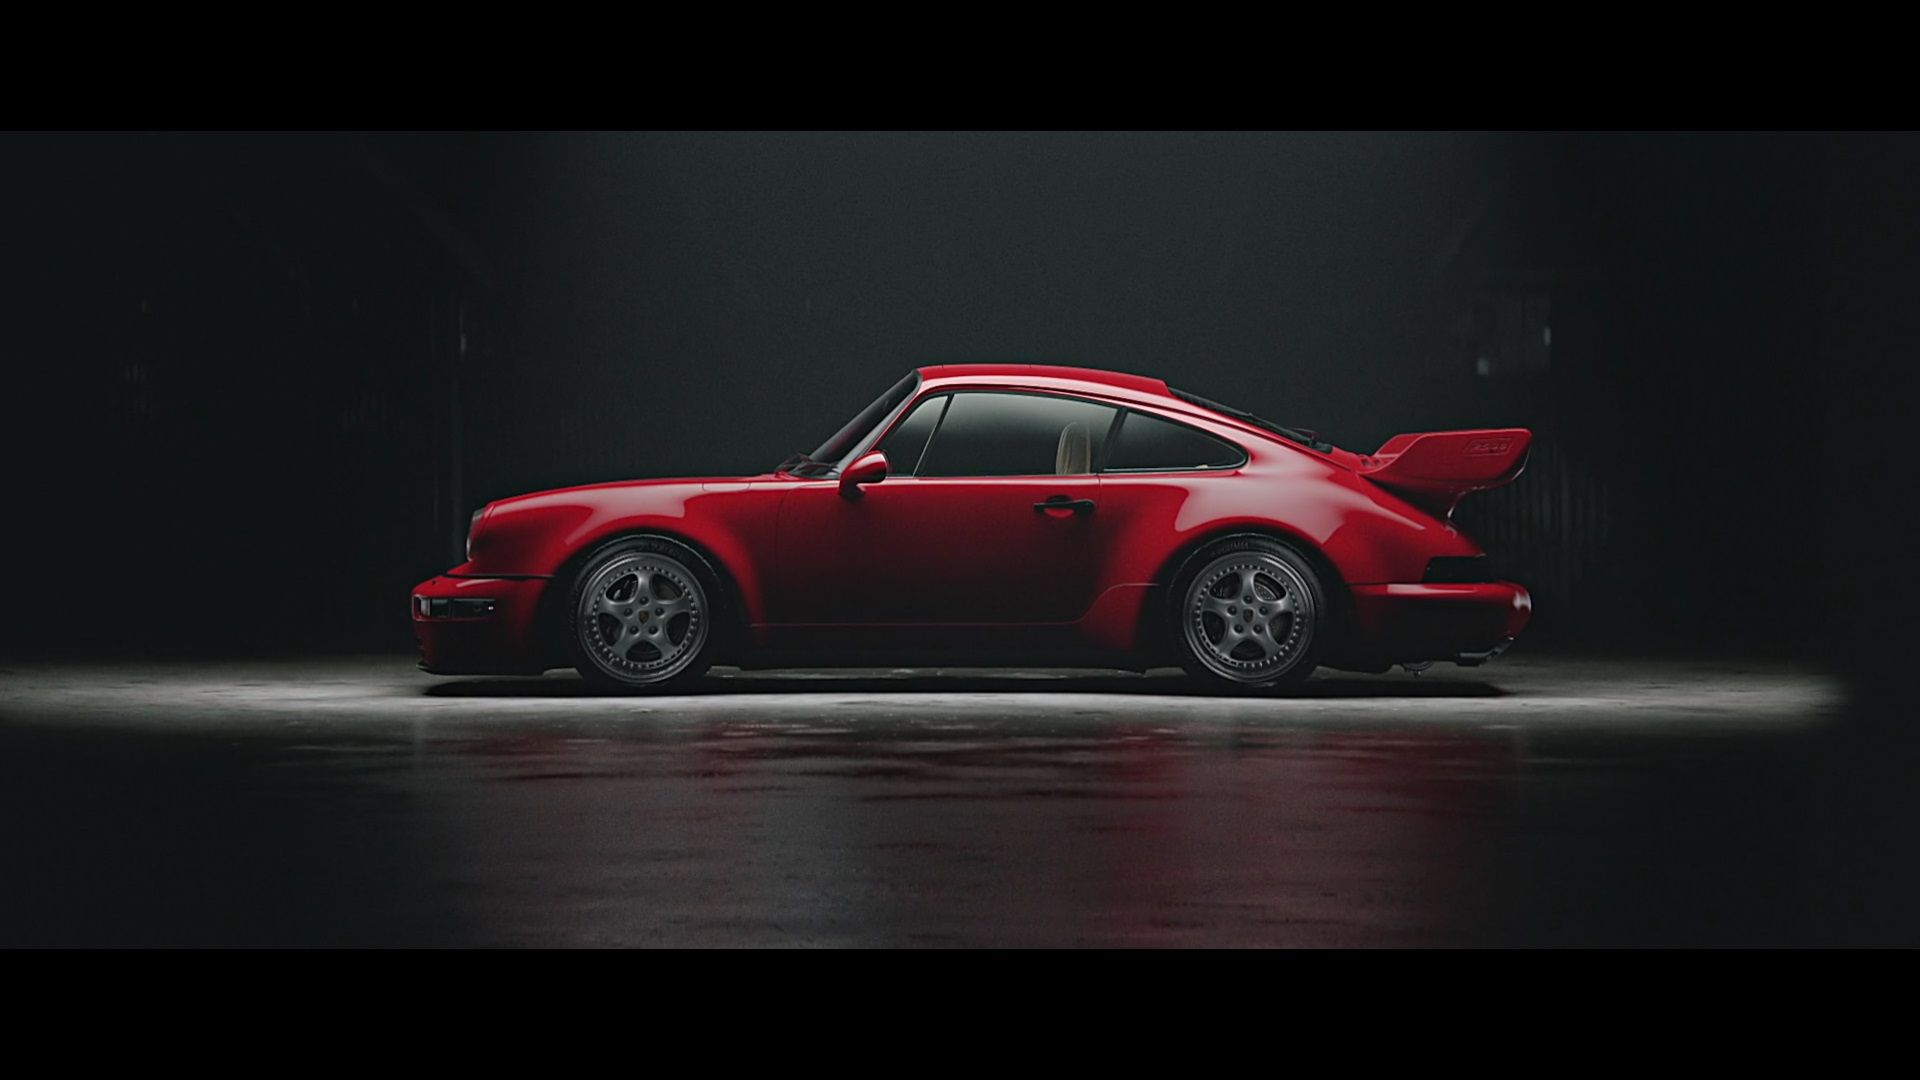 You'll Never Believe This 964 Carrera RS Isn't Real